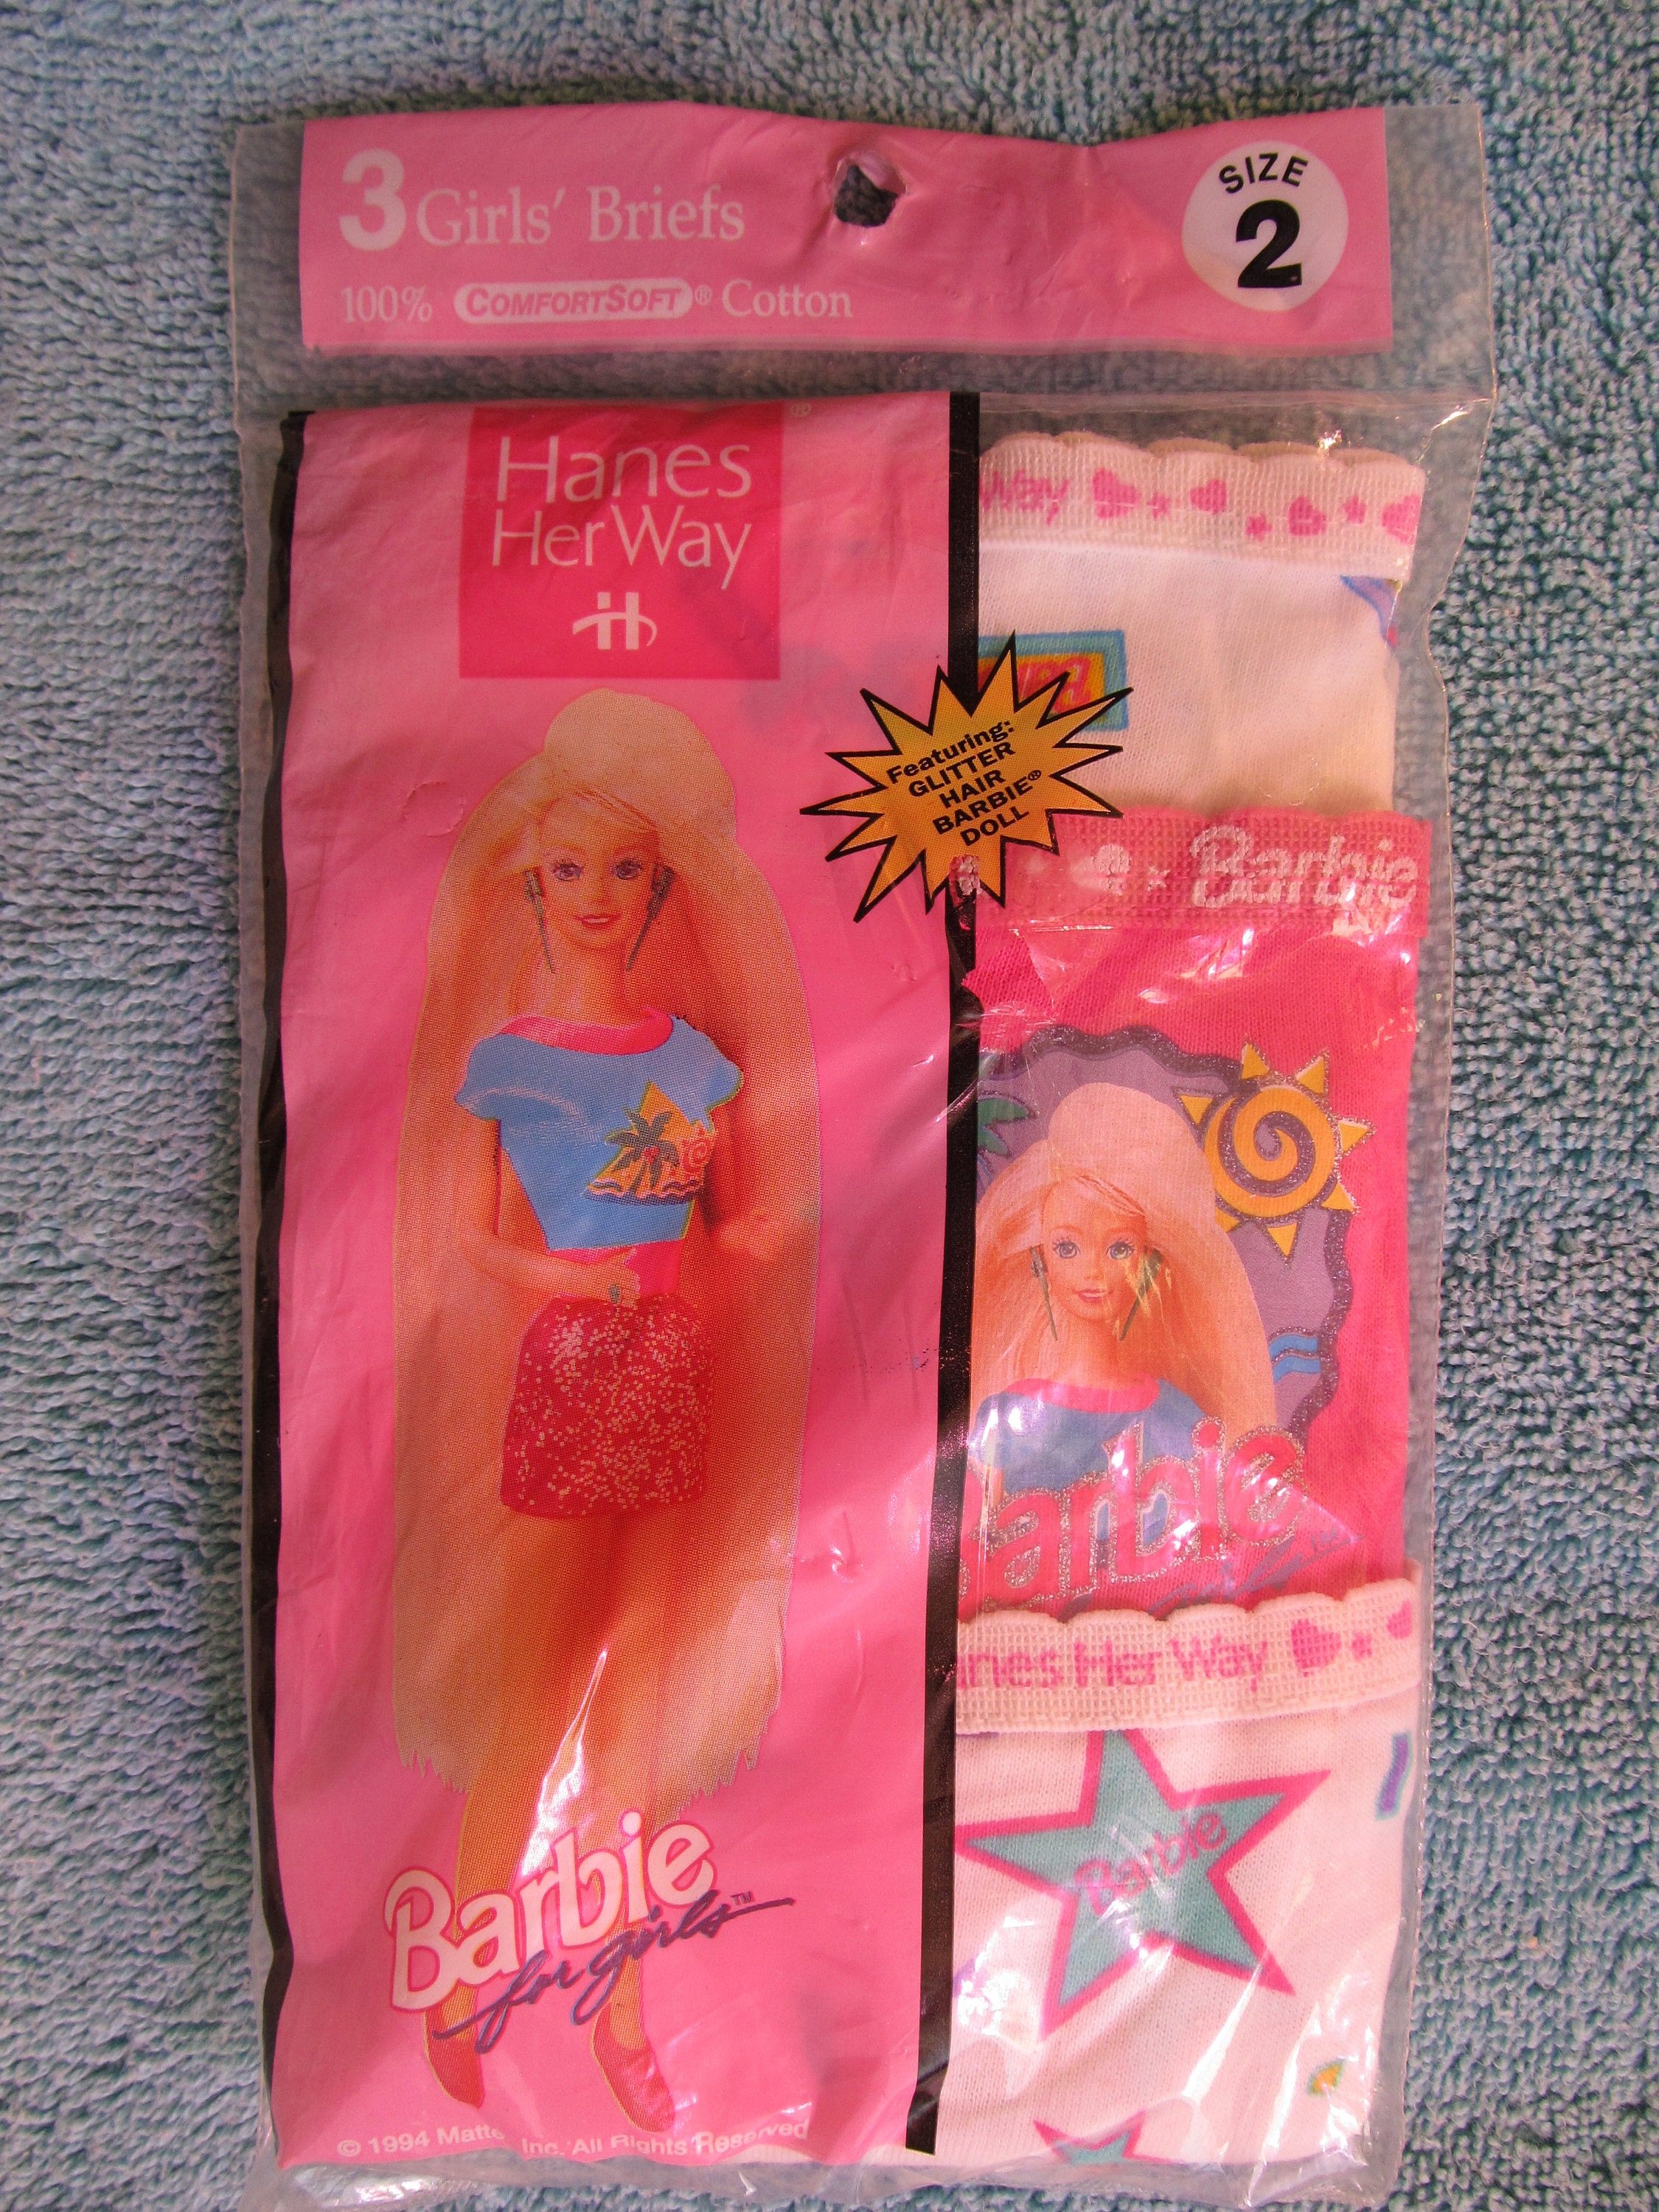 Hanes Her Way Barbie for Girls Briefs Size 2 New in Package of 3 Featuring  Glitter Hair Barbie Doll -  India